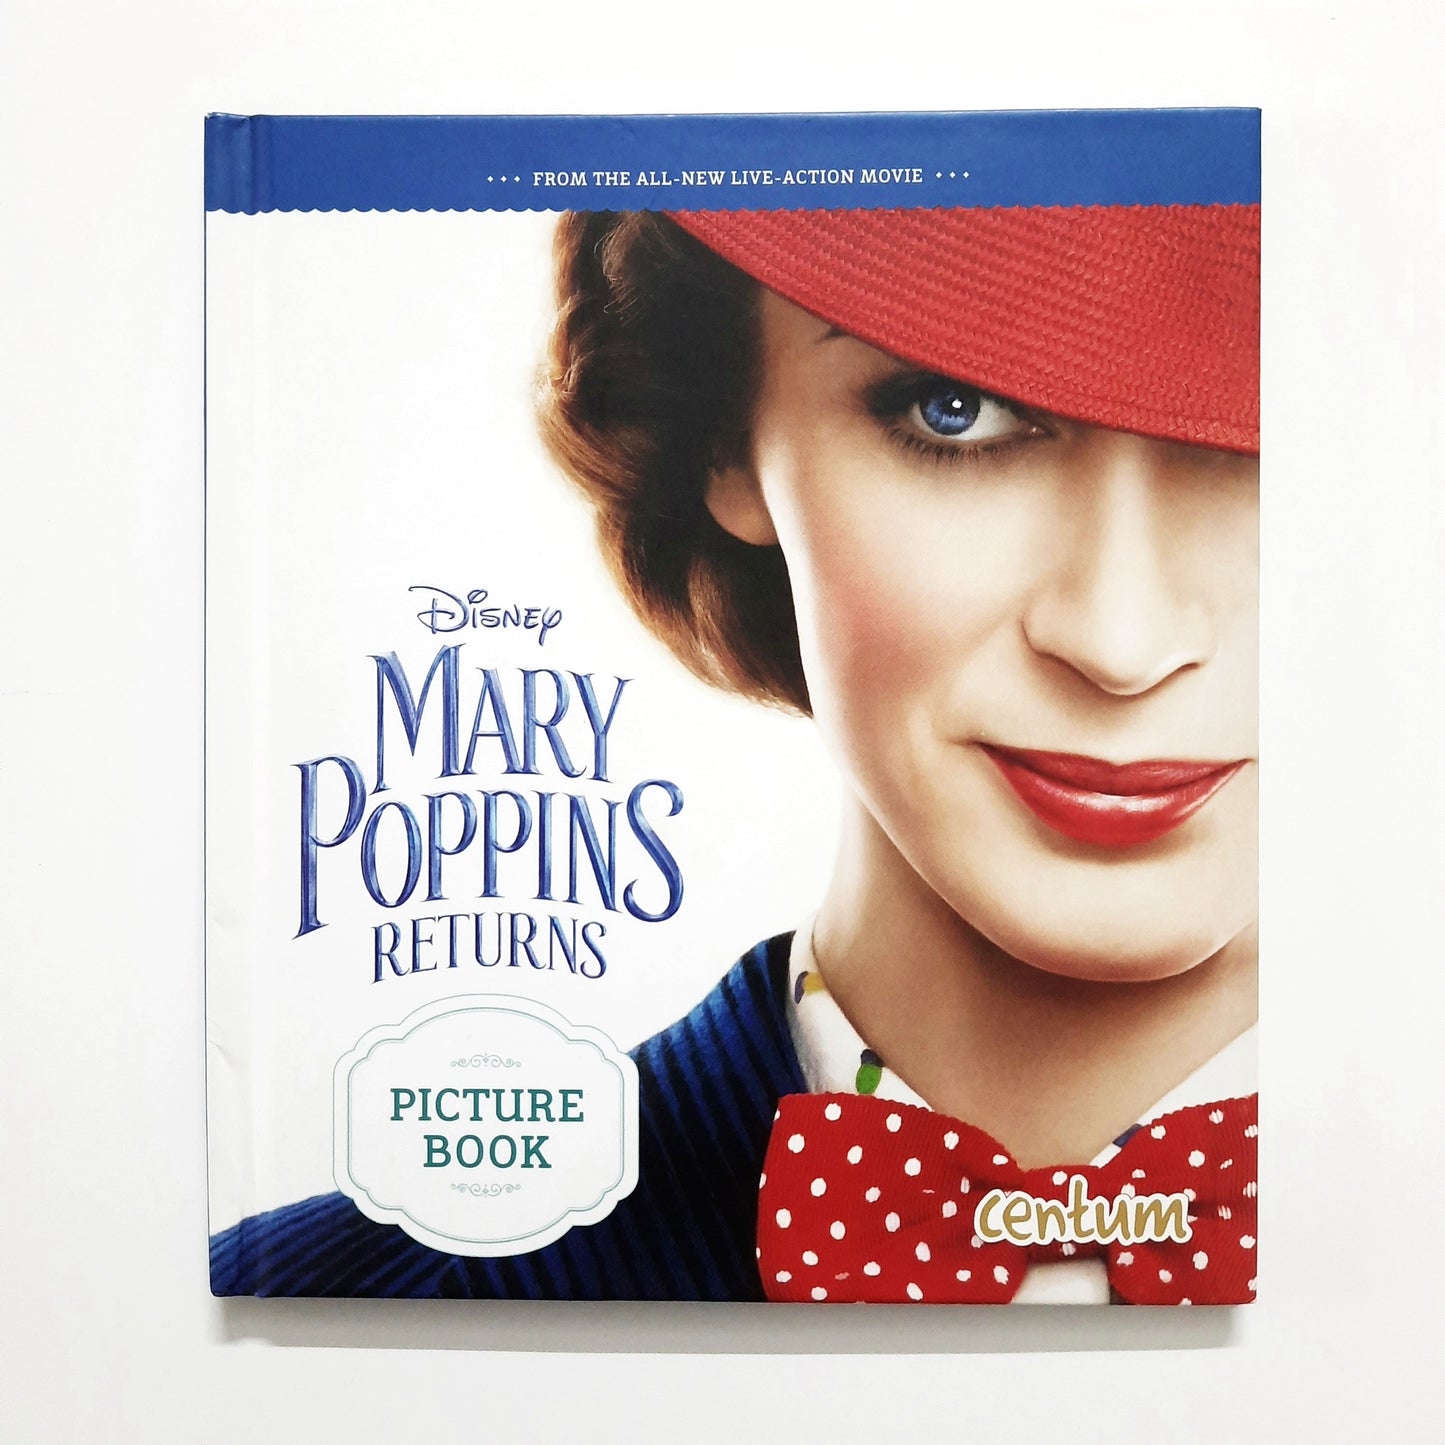 Mary Poppins Returns - Picture Book